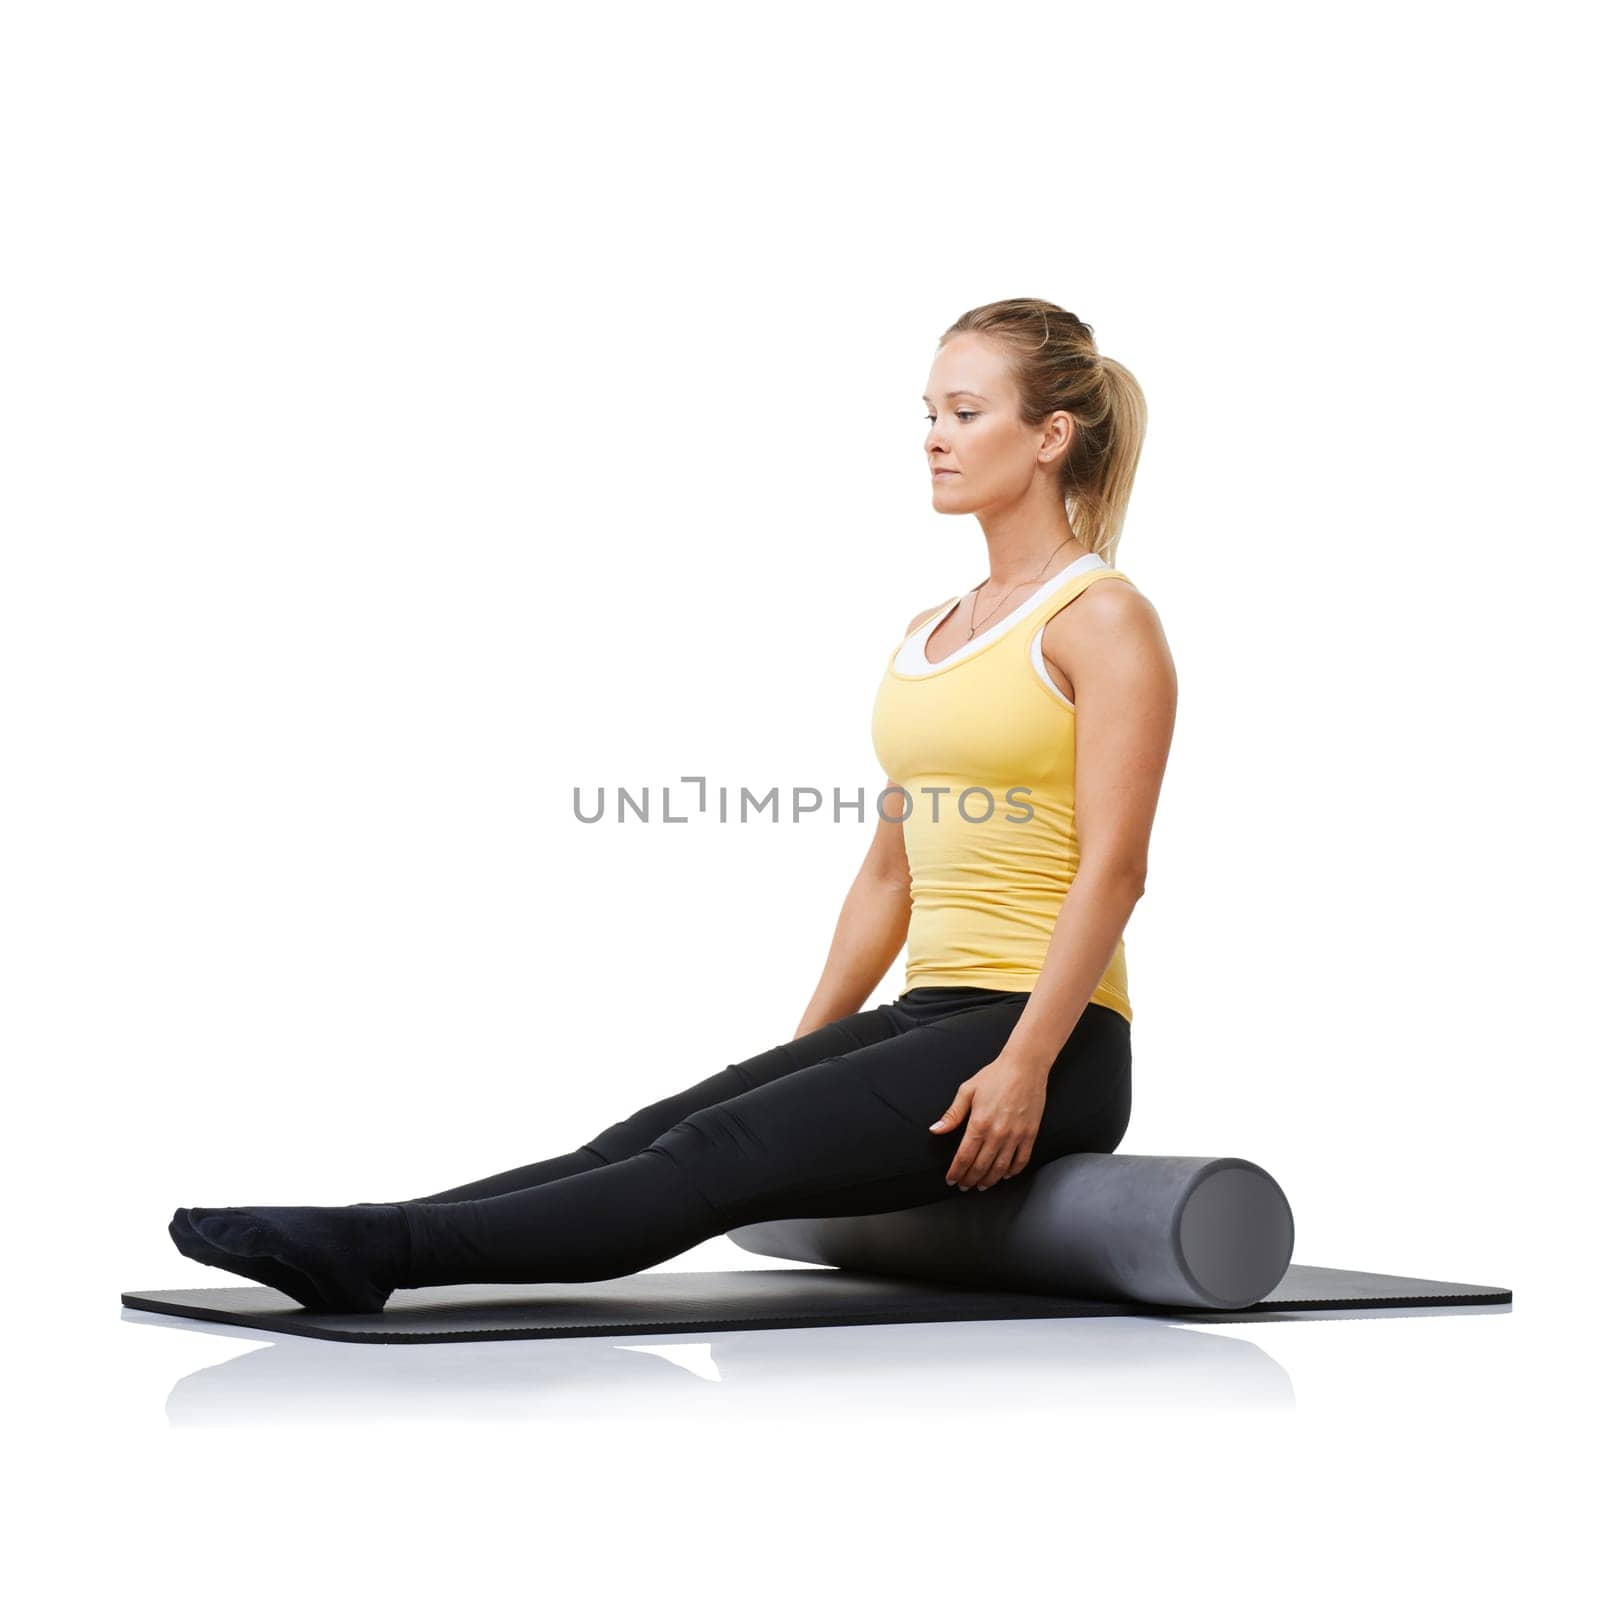 Studio workout, foam roller and woman with posture exercise, spine rehabilitation or yoga performance challenge. Floor, body wellness training and person sit on fitness equipment on white background.